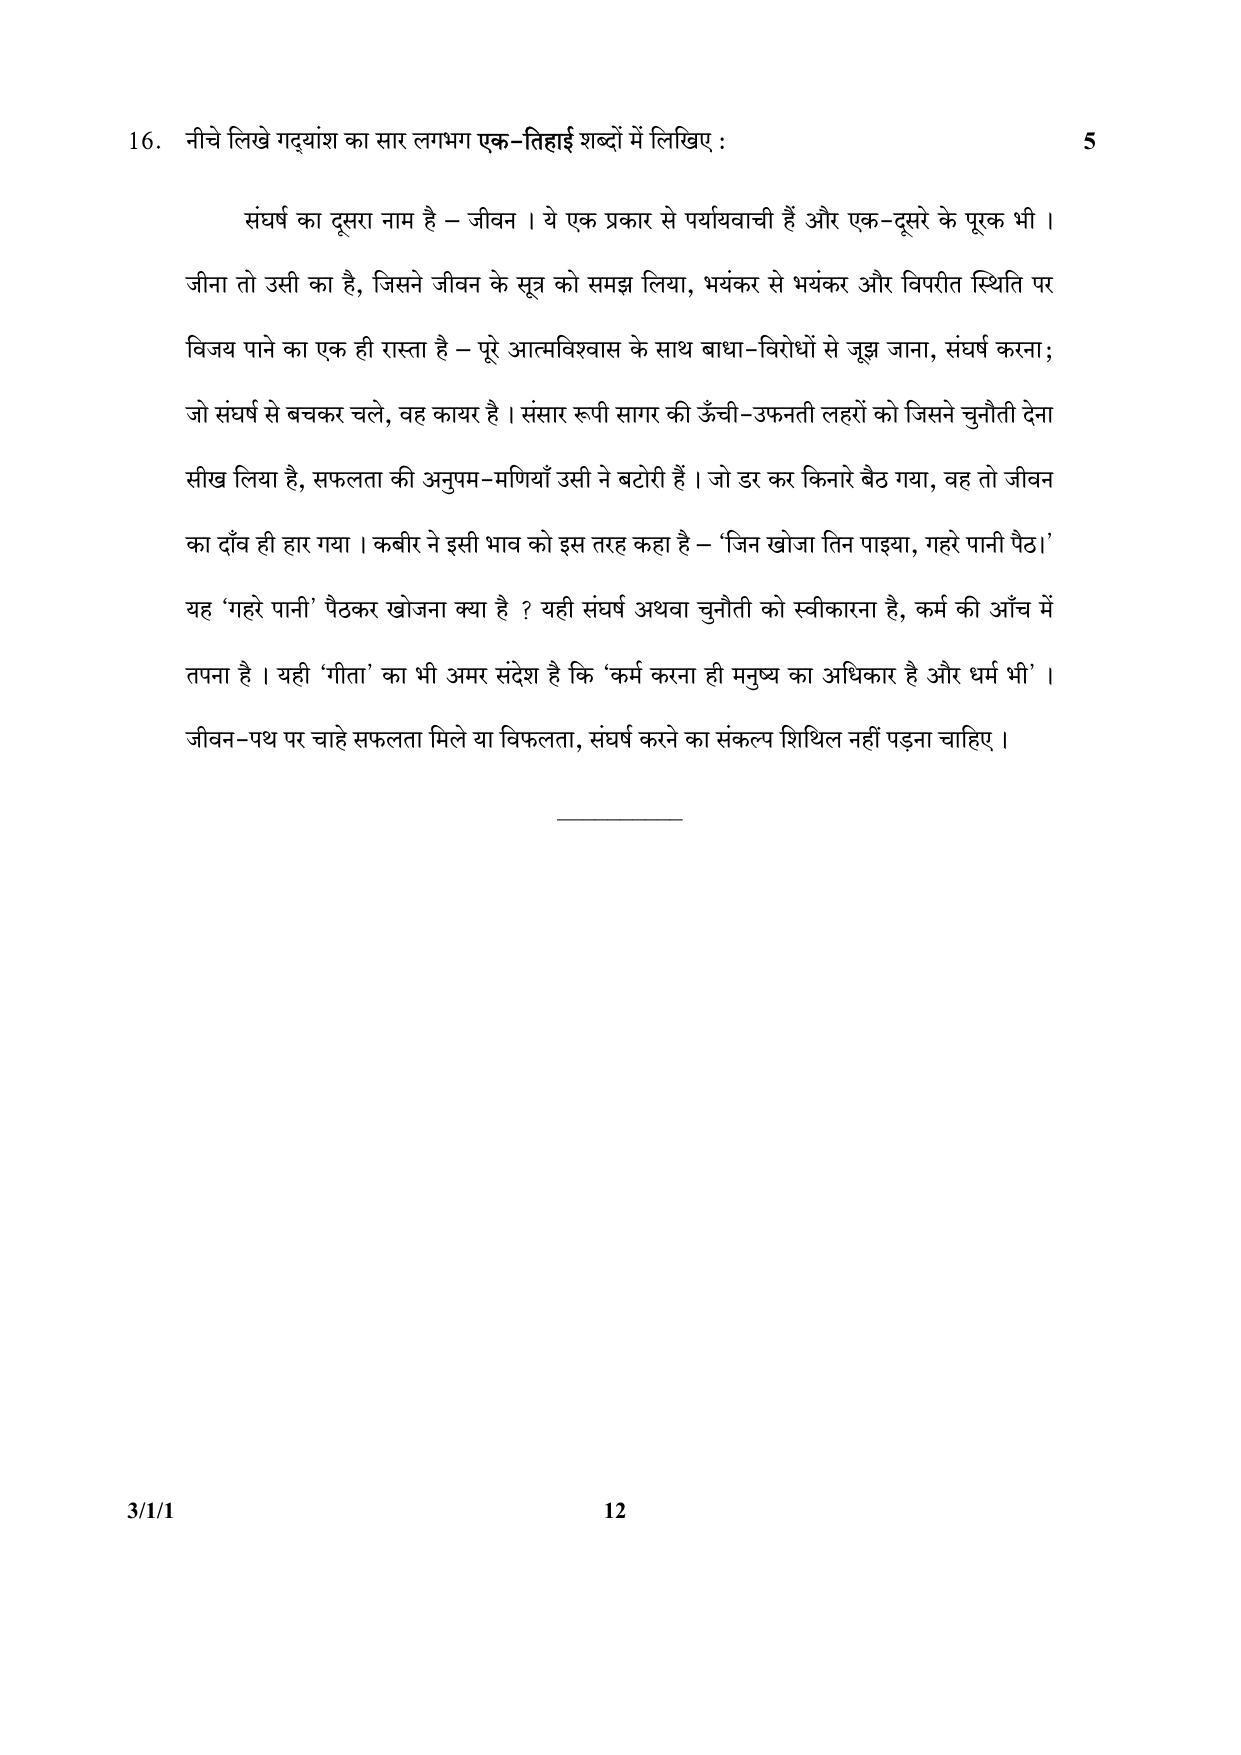 CBSE Class 10 3-1-1 (Hindi) 2017-comptt Question Paper - Page 12